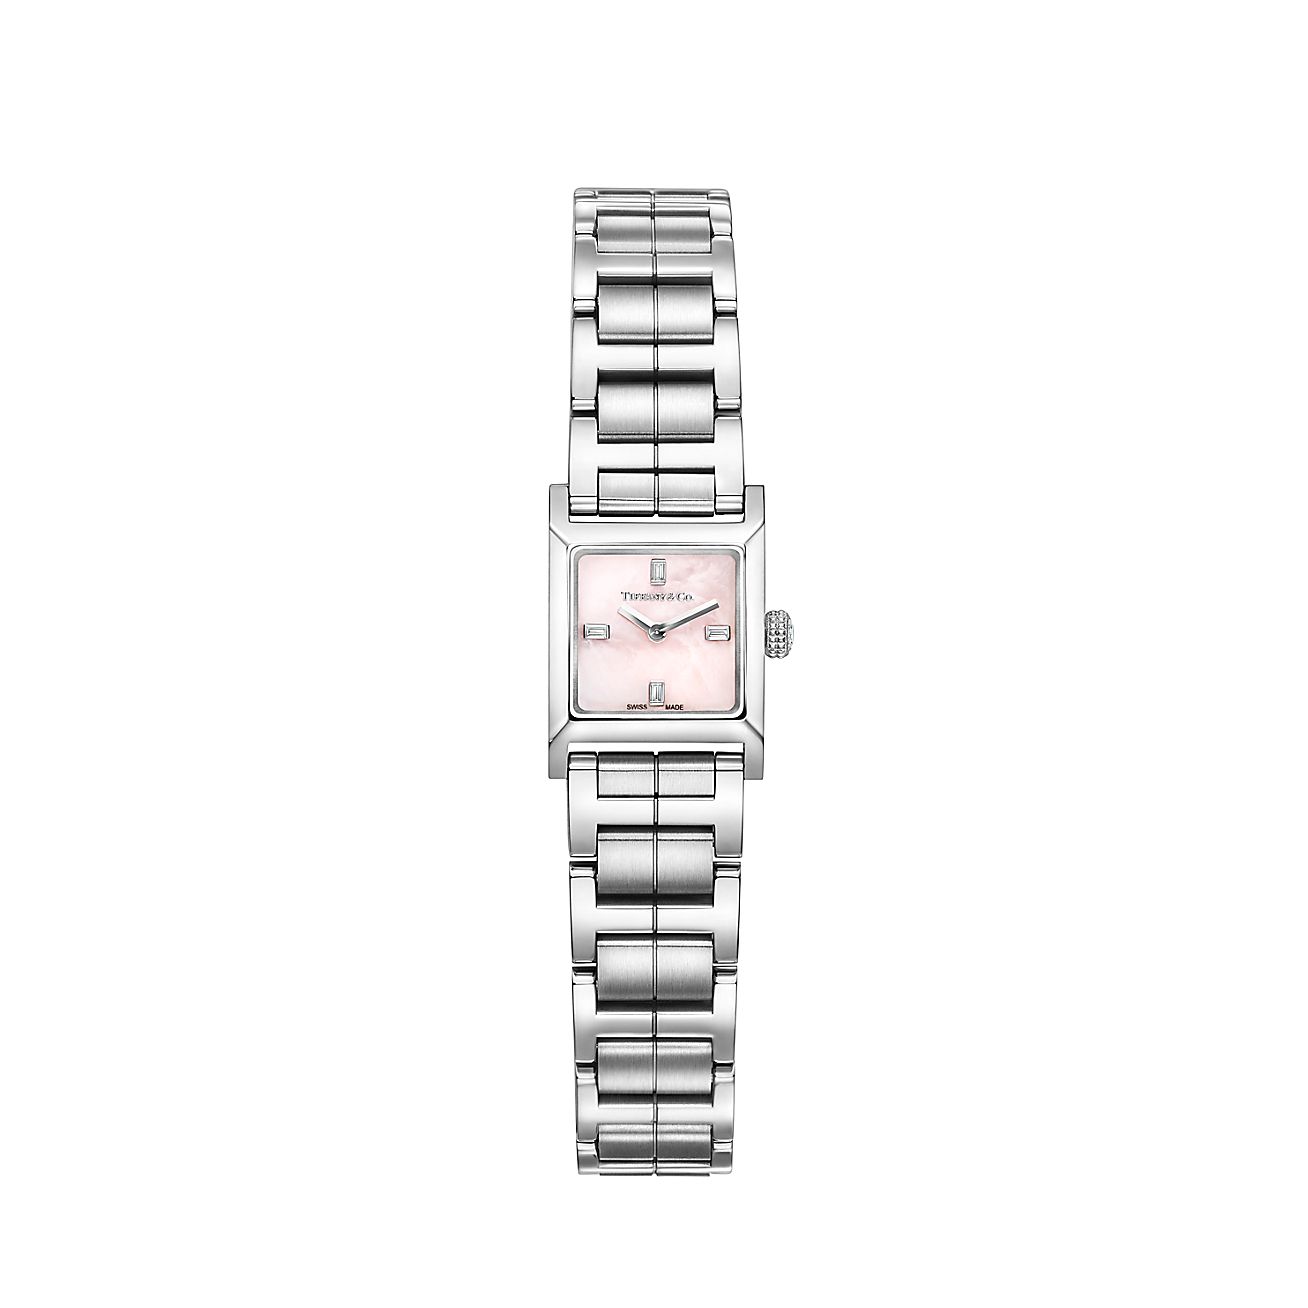 Tiffany 1837 Makers 16 mm Square Watch in Stainless Steel with a Pink Dial